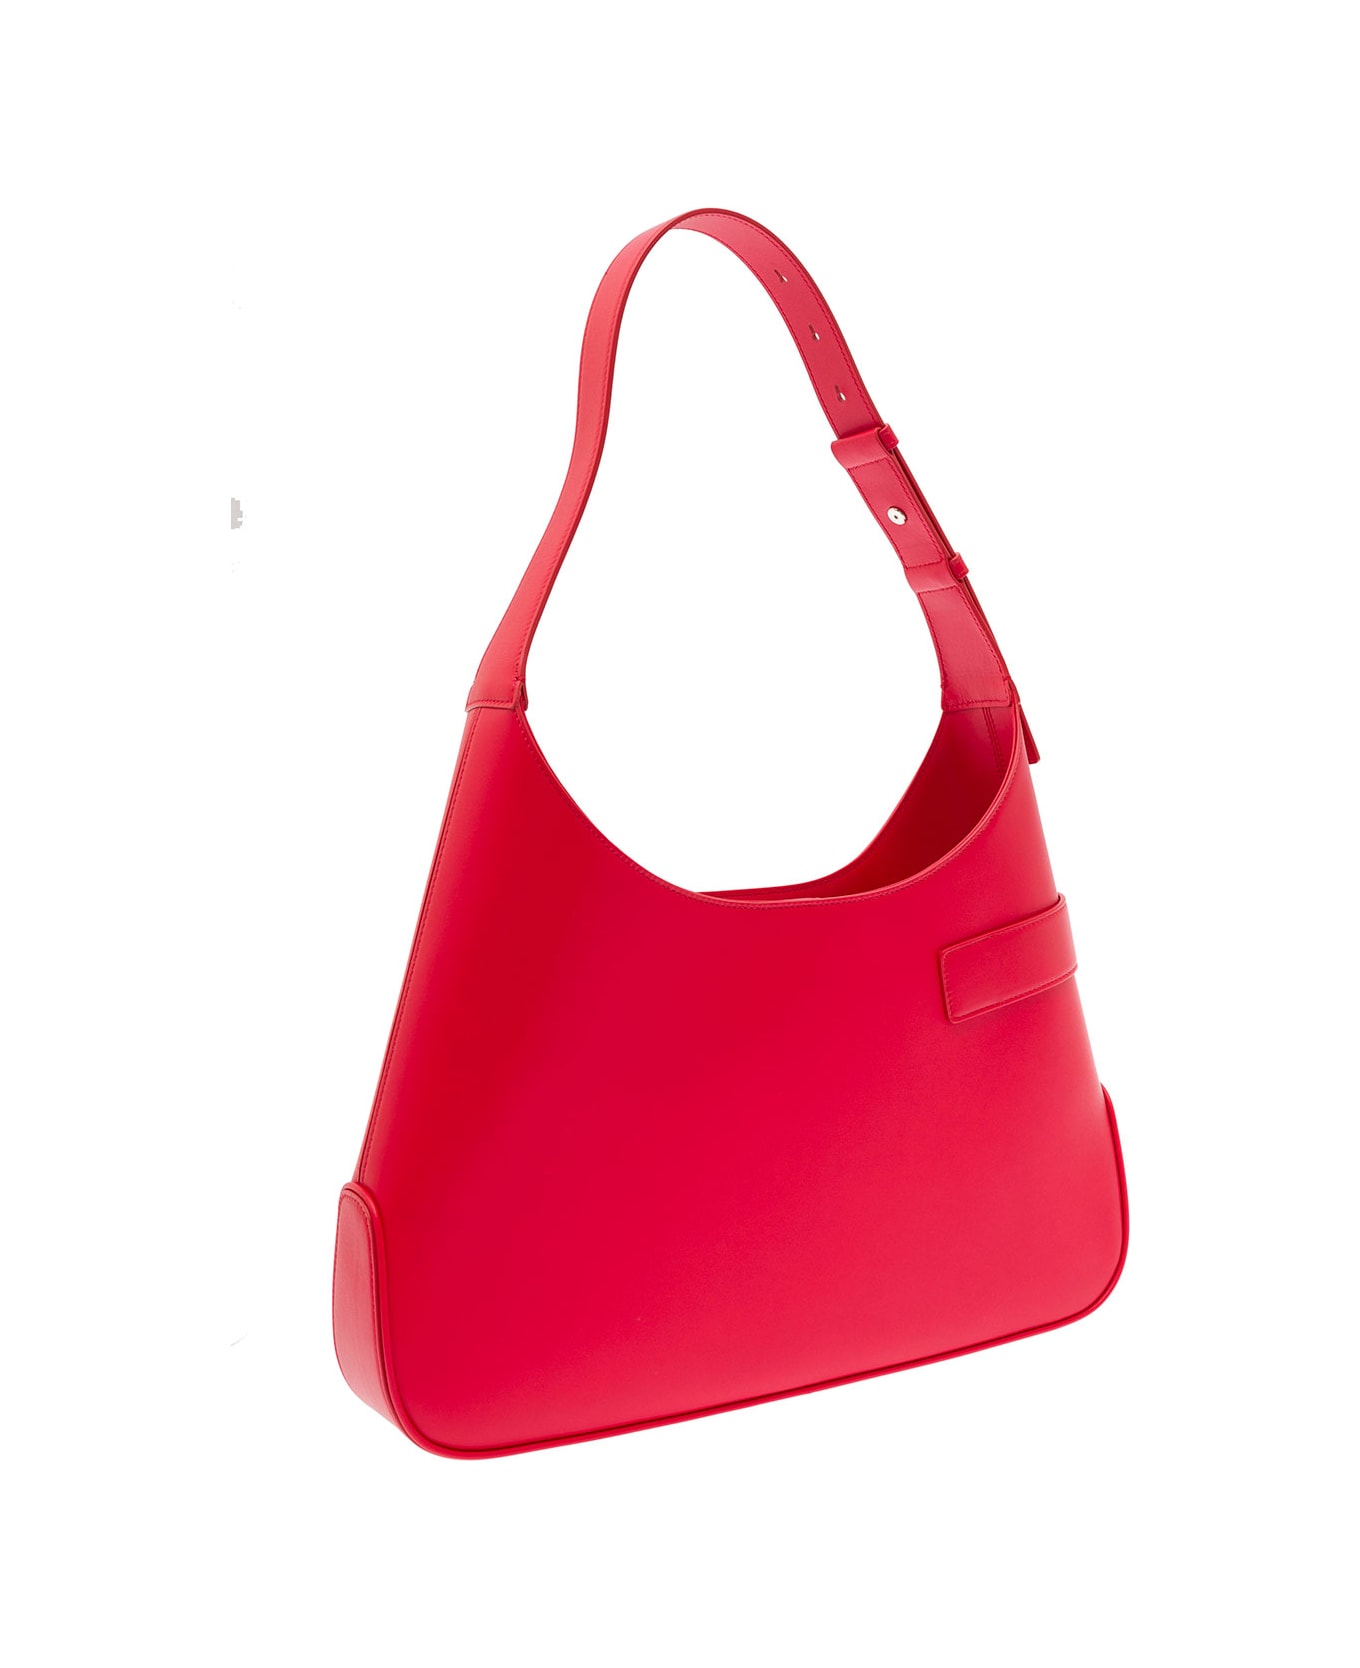 Ferragamo Red Hobo Shoulder Bag With Asymmetric Pocket And Gancini Buckle In Leather Woman - Red